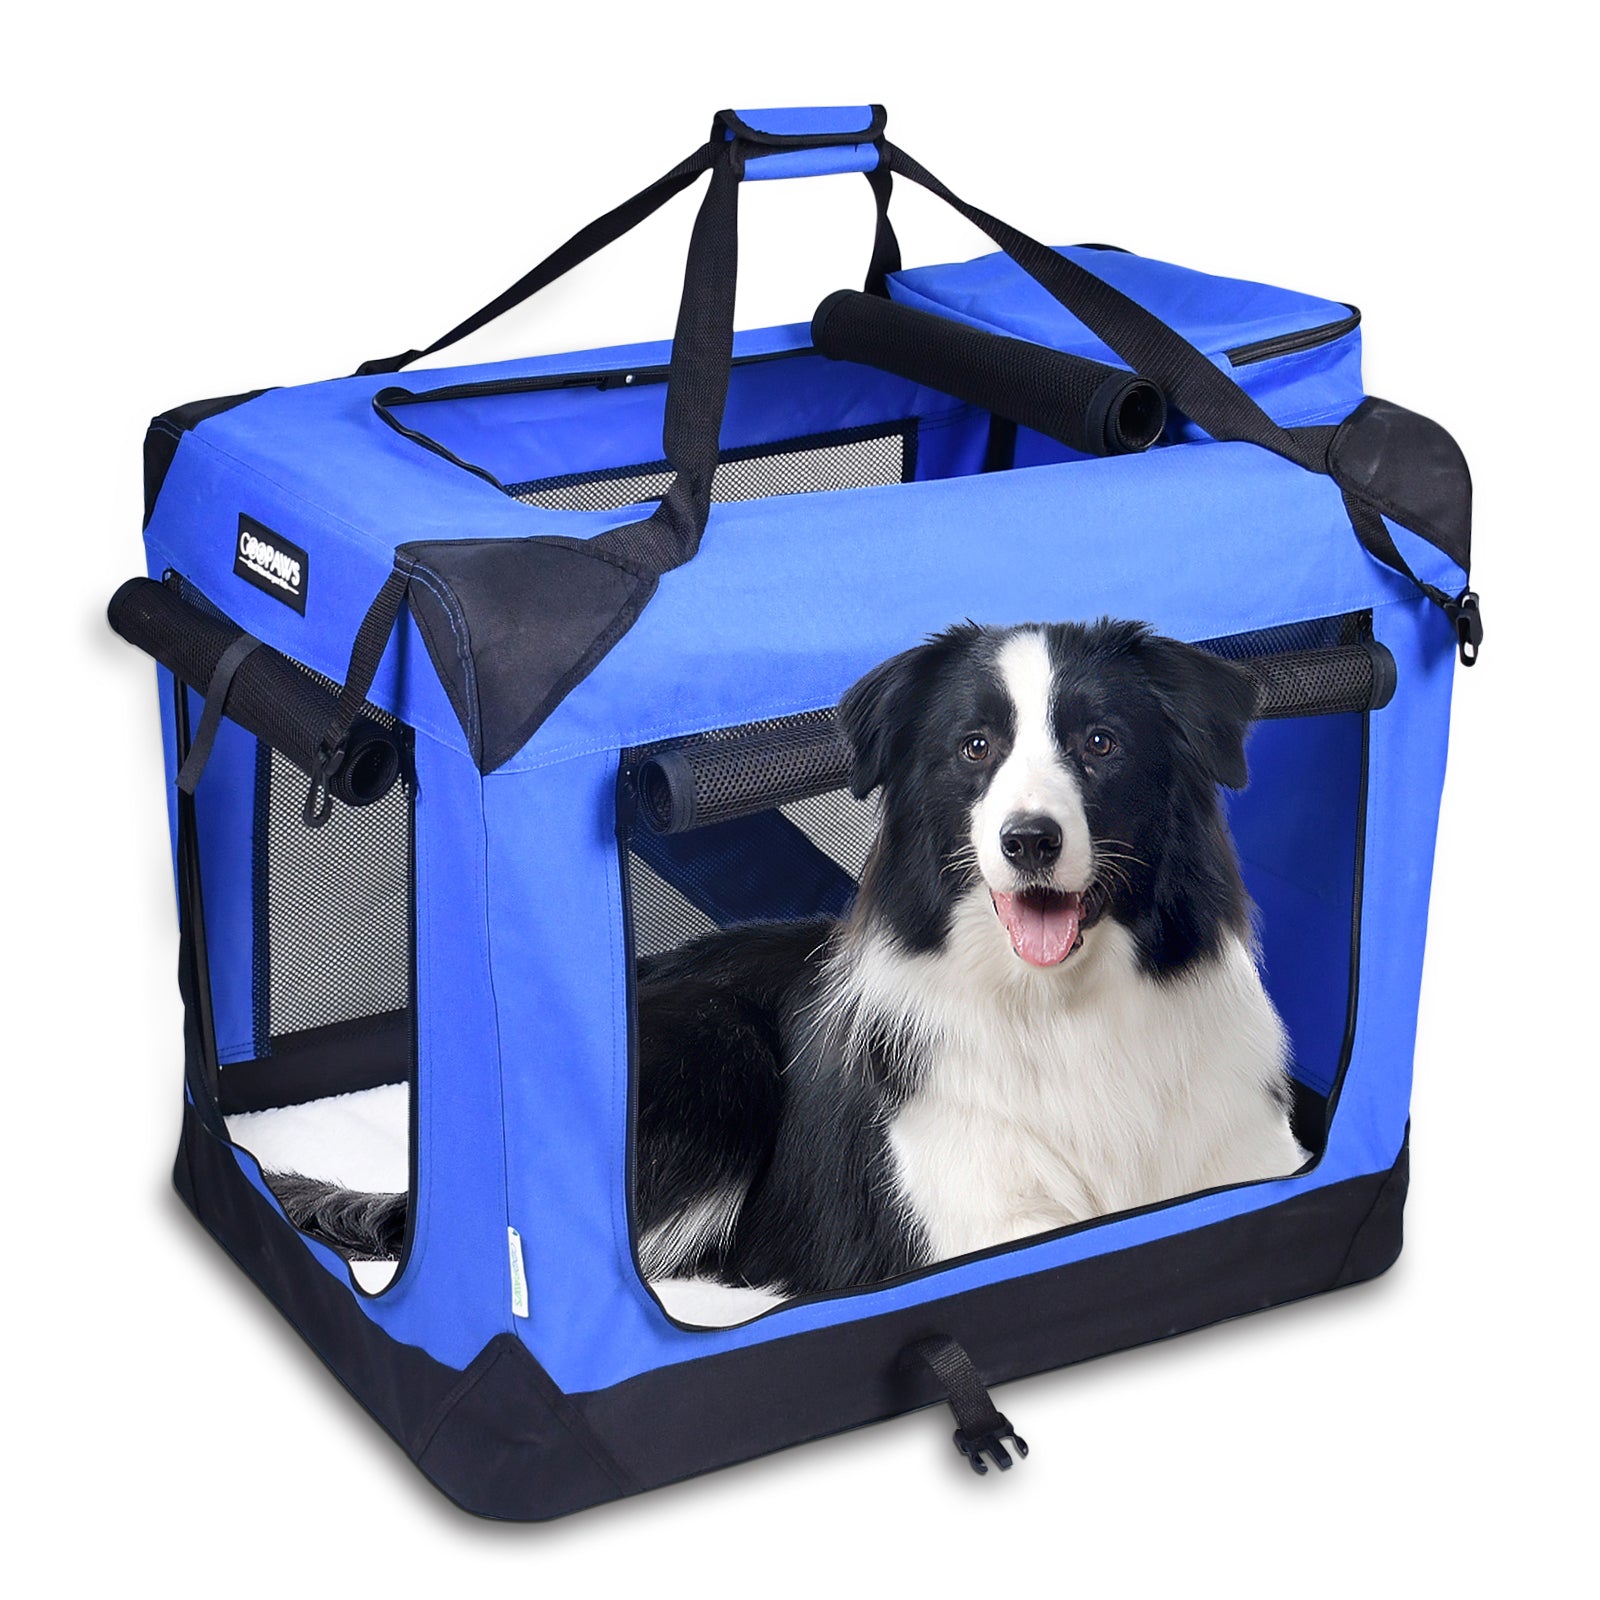 Jespet Indoor & Outdoor 3-Door Collapsible Soft-Sided Dog, Cat & Small Pet Crate, Blue, 36''